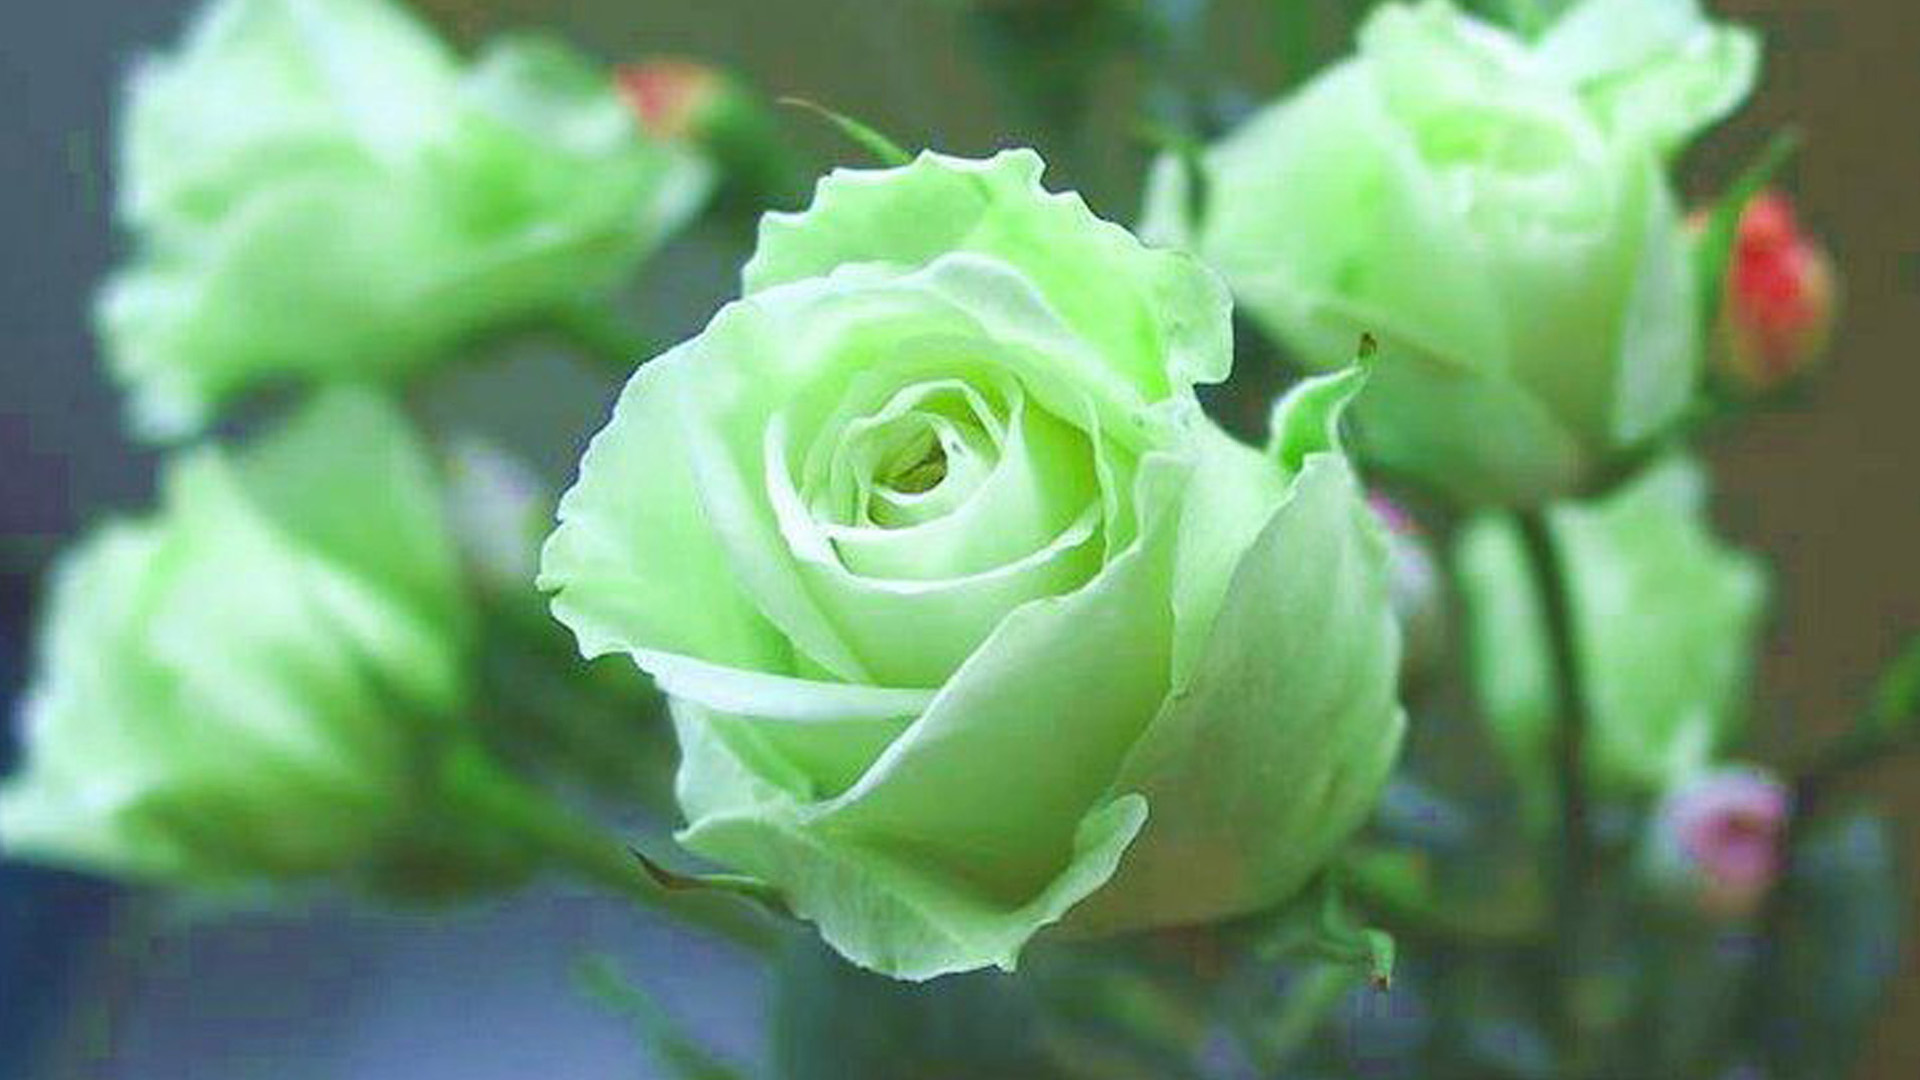 Green Rose Wallpaper Pictures Image